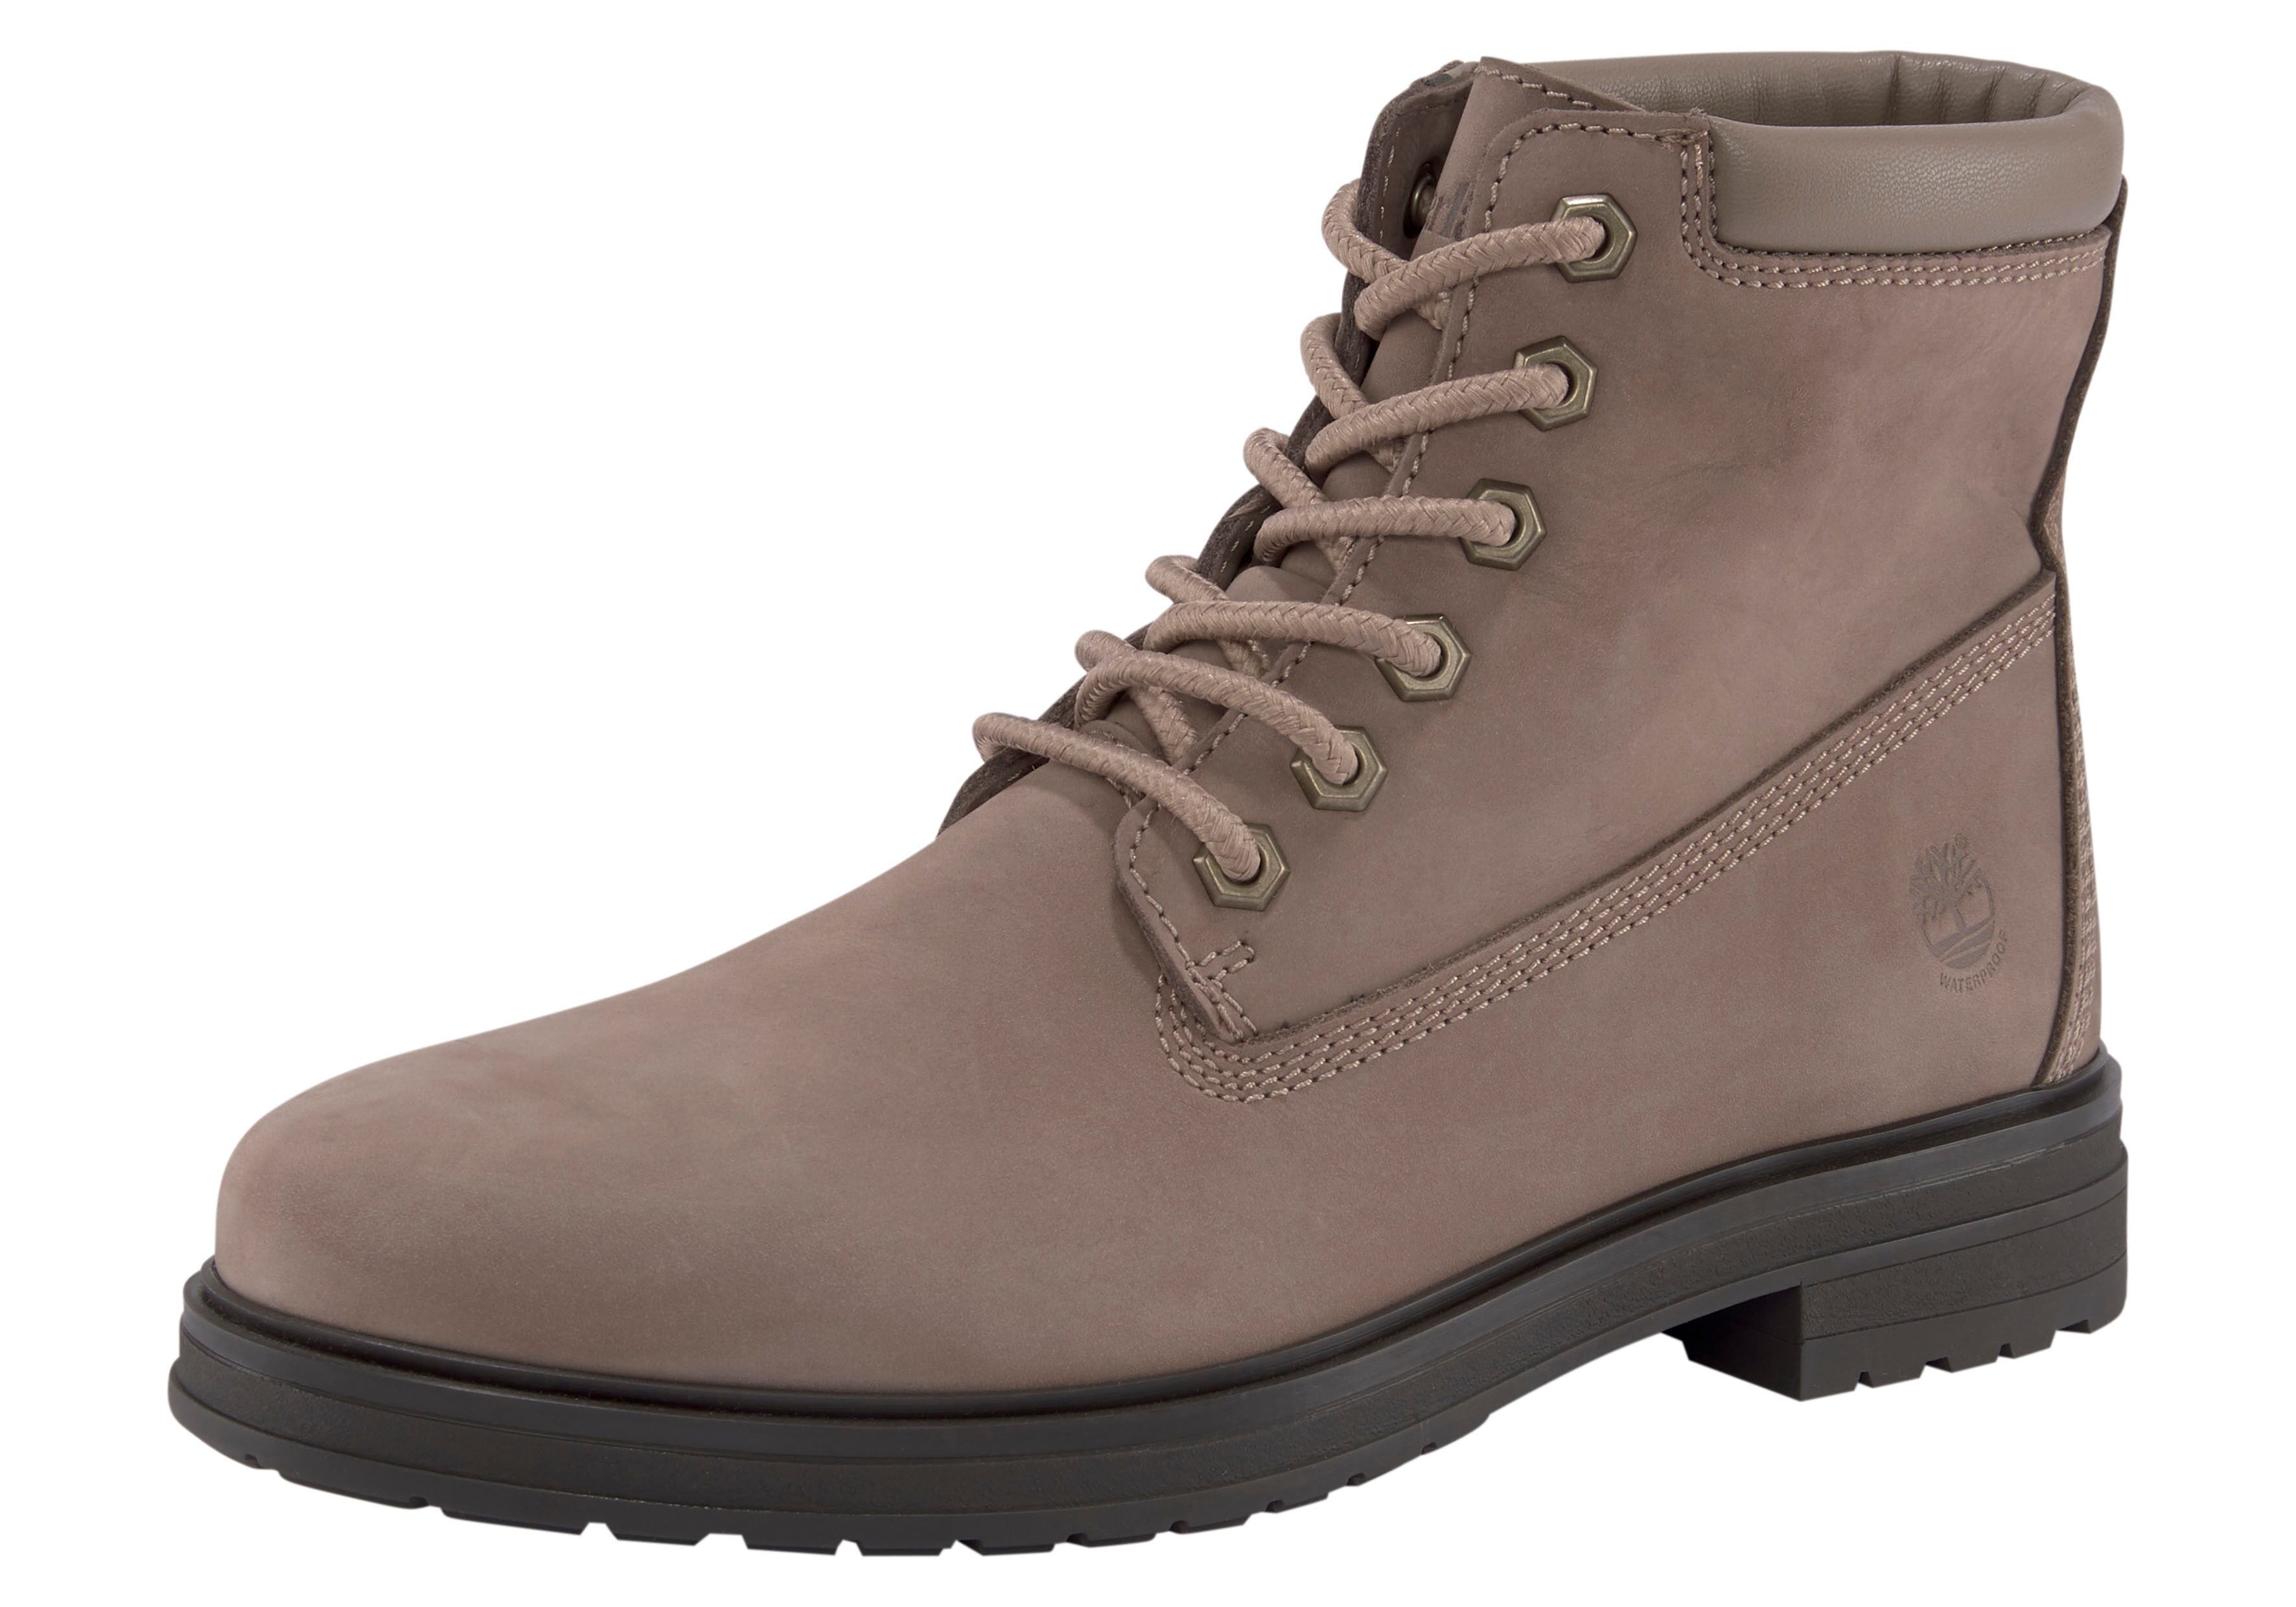 Timberland Schnürboots »Hannover Hill 6in Boot WP« grau  36 37,5 37 38 38,5 39 39,5 40 41,5 41 42